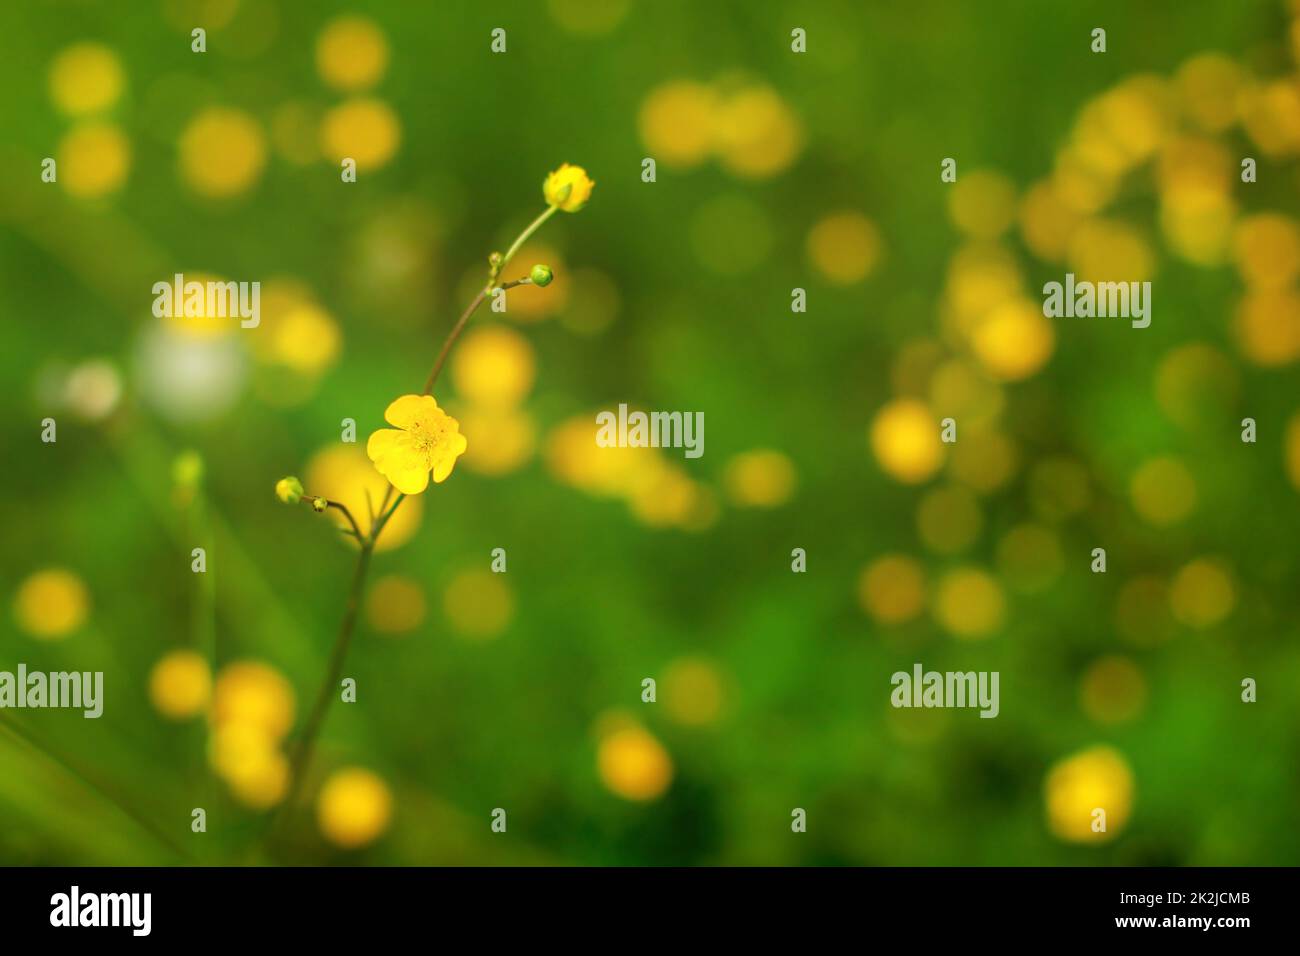 Shallow depth of field photo (only single flower in focus), common buttercup (Ranunculus acris), with more blurred plants in background. Abstract spring background Stock Photo